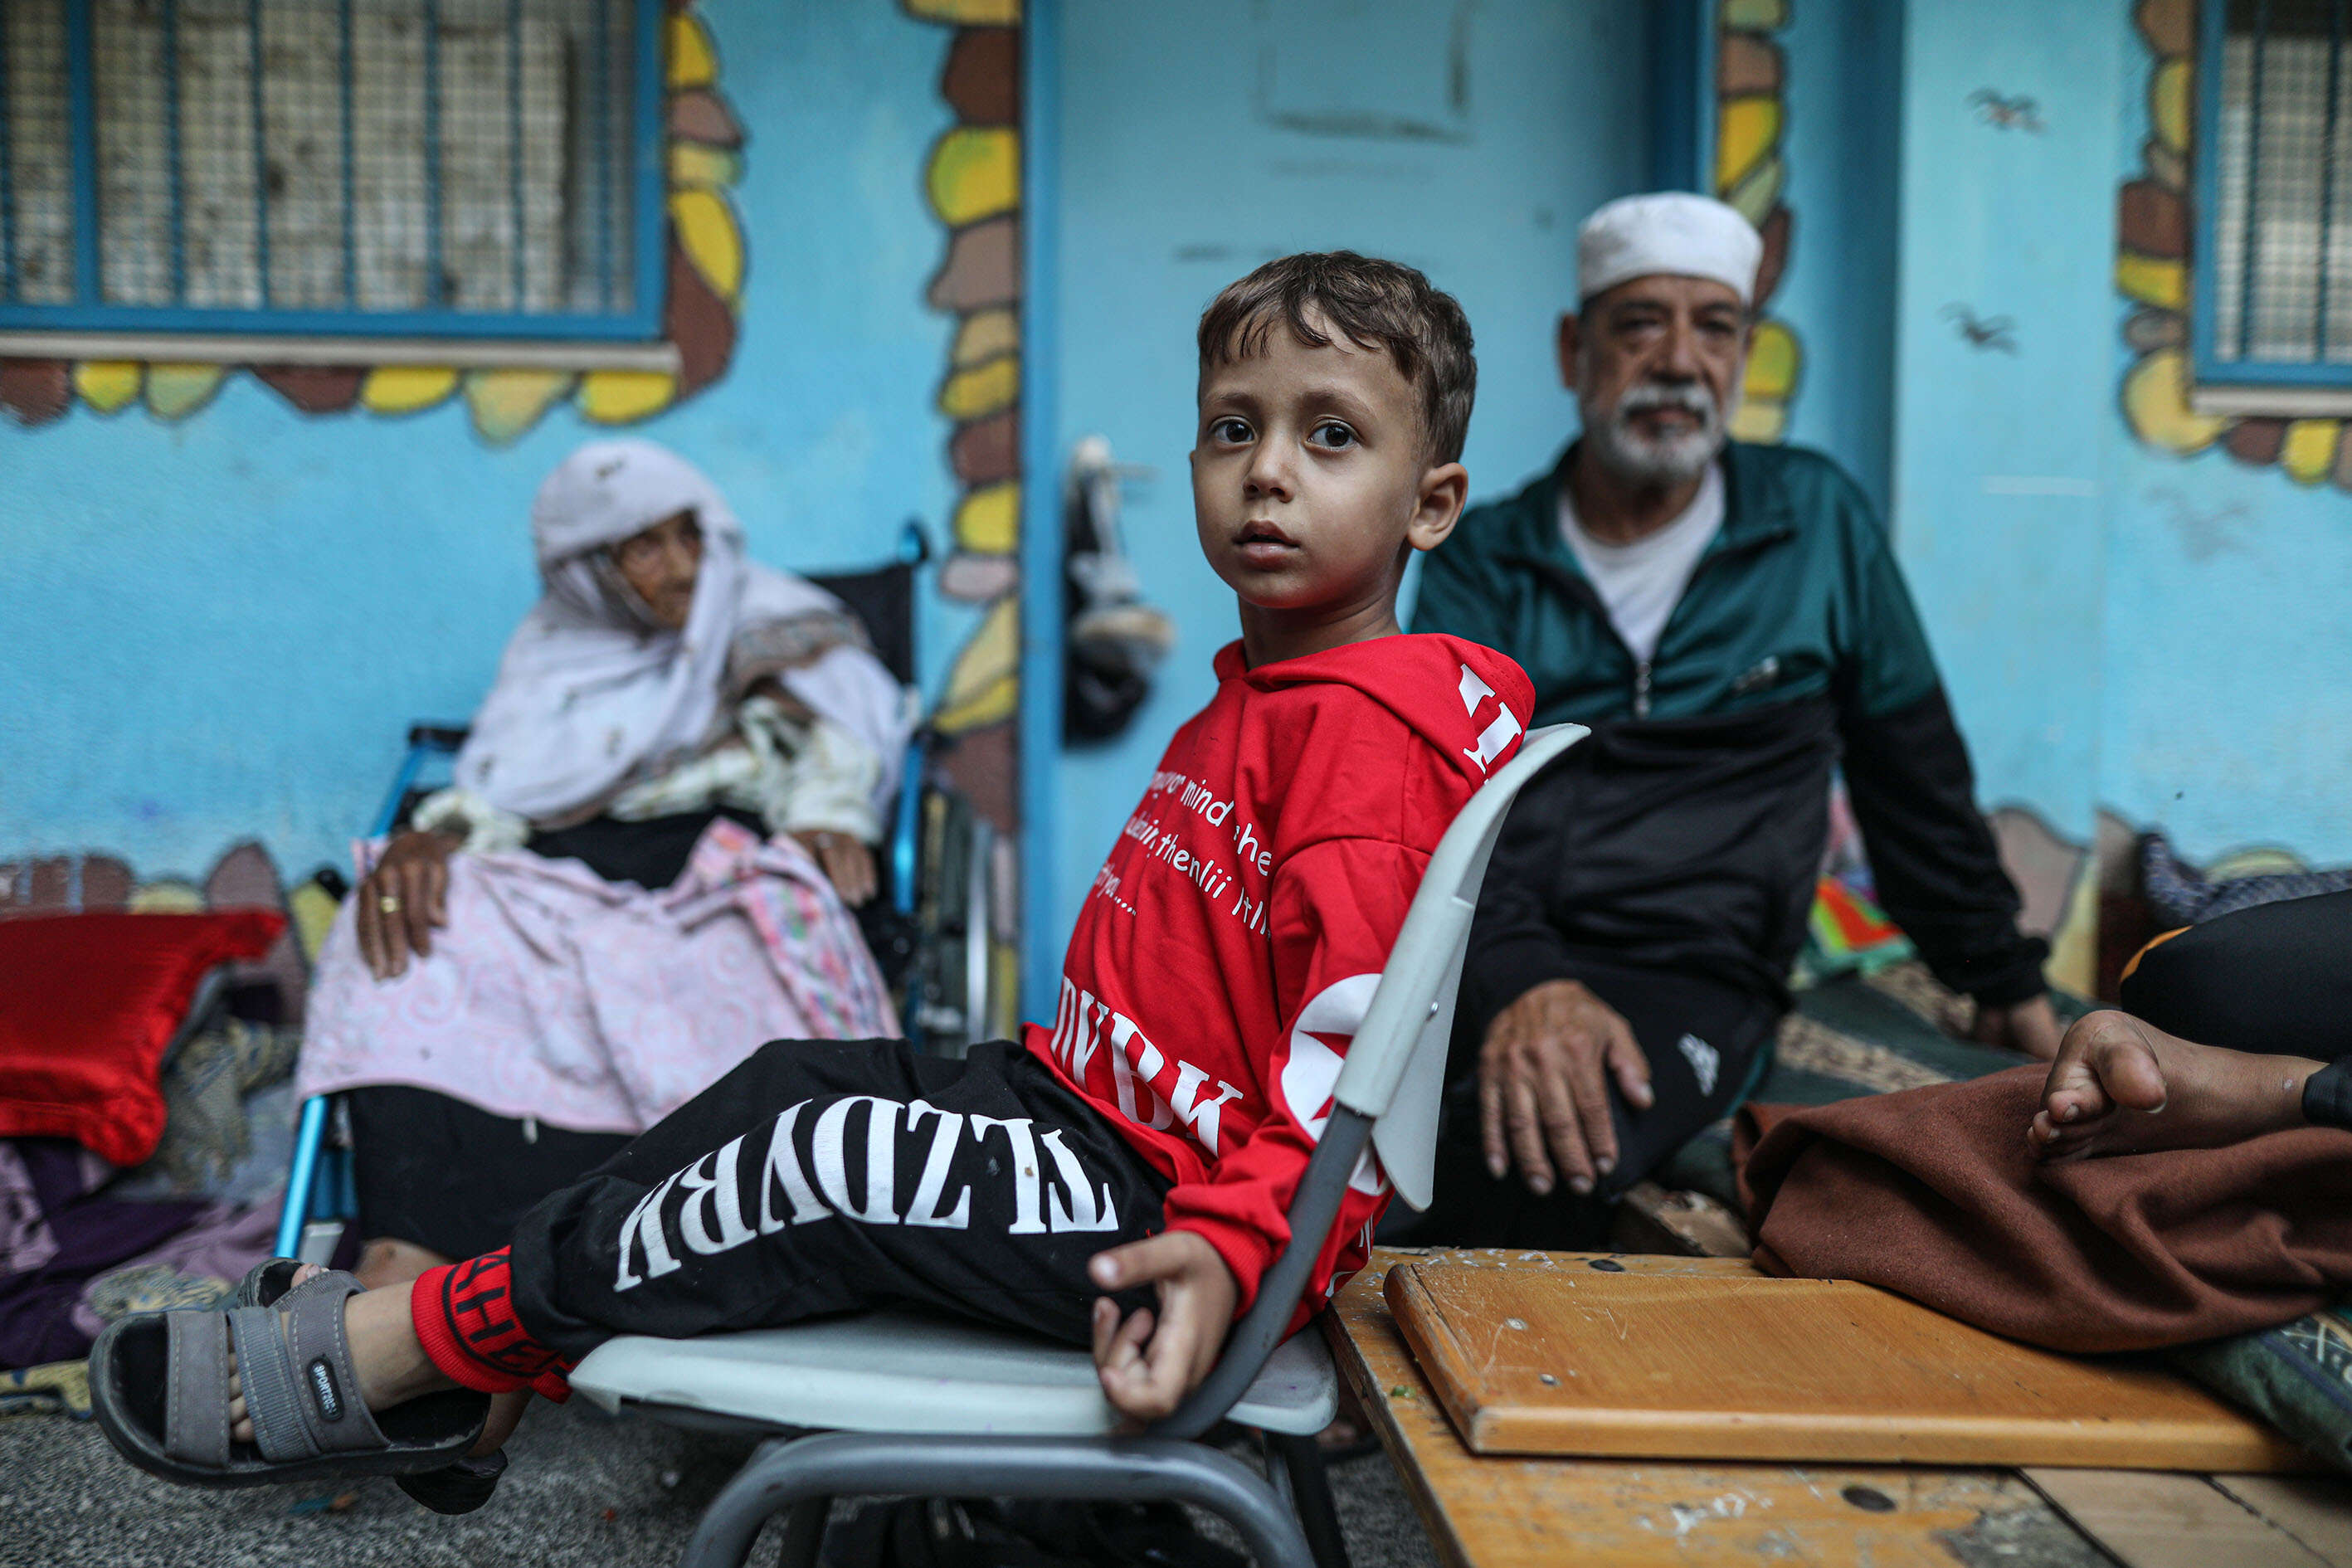 A Palestinian boy sits in a chair at a UNRWA school. An elderly woman and man sit nearby.